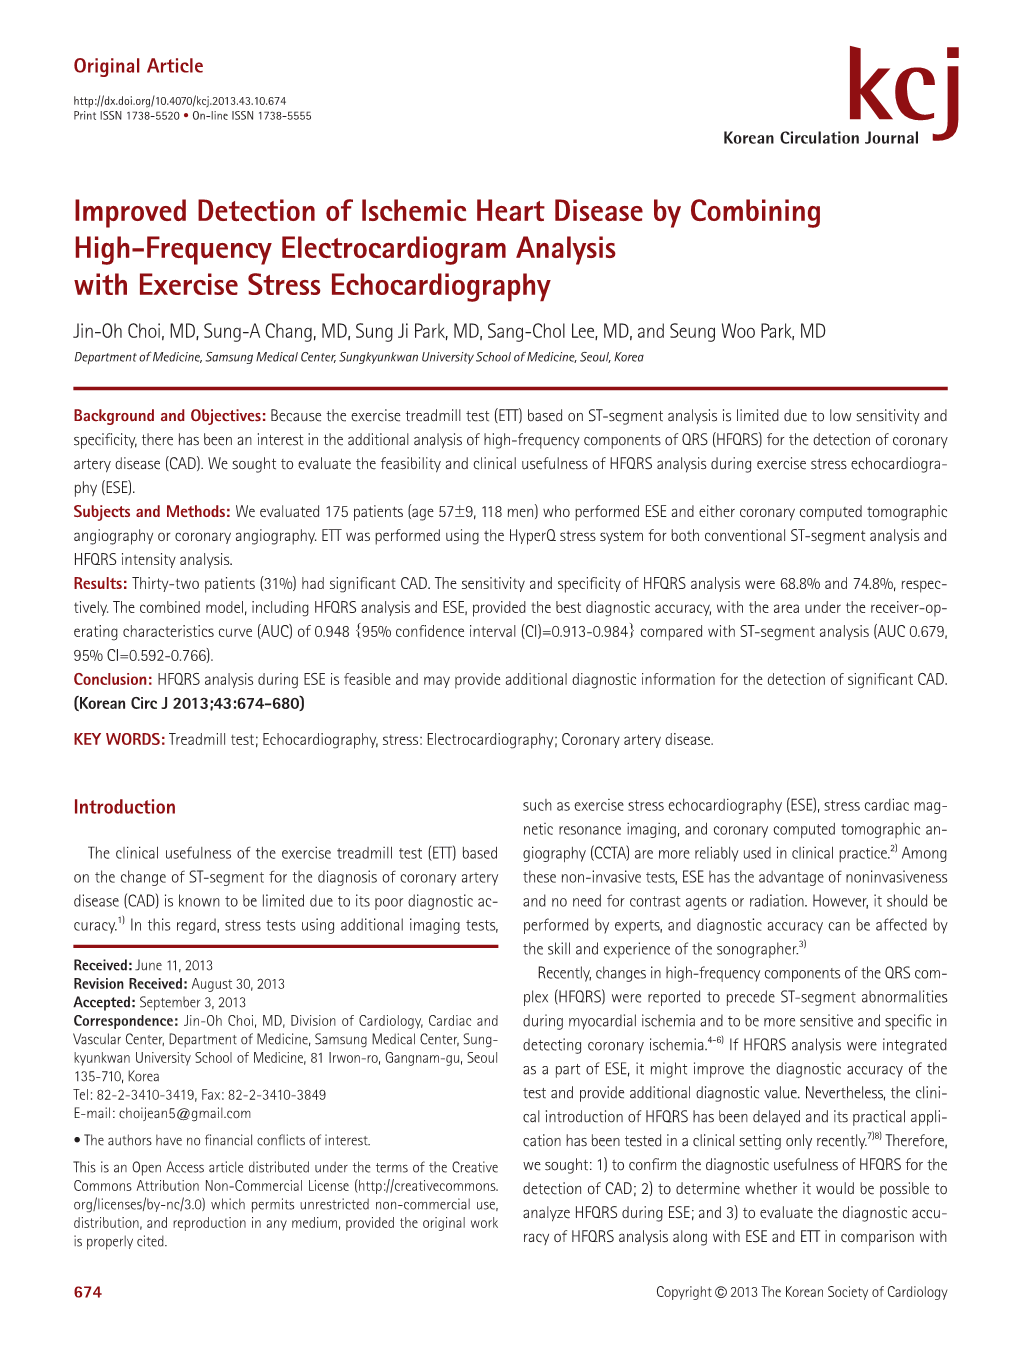 Improved Detection of Ischemic Heart Disease by Combining High-Frequency Electrocardiogram Analysis with Exercise Stress Echoc